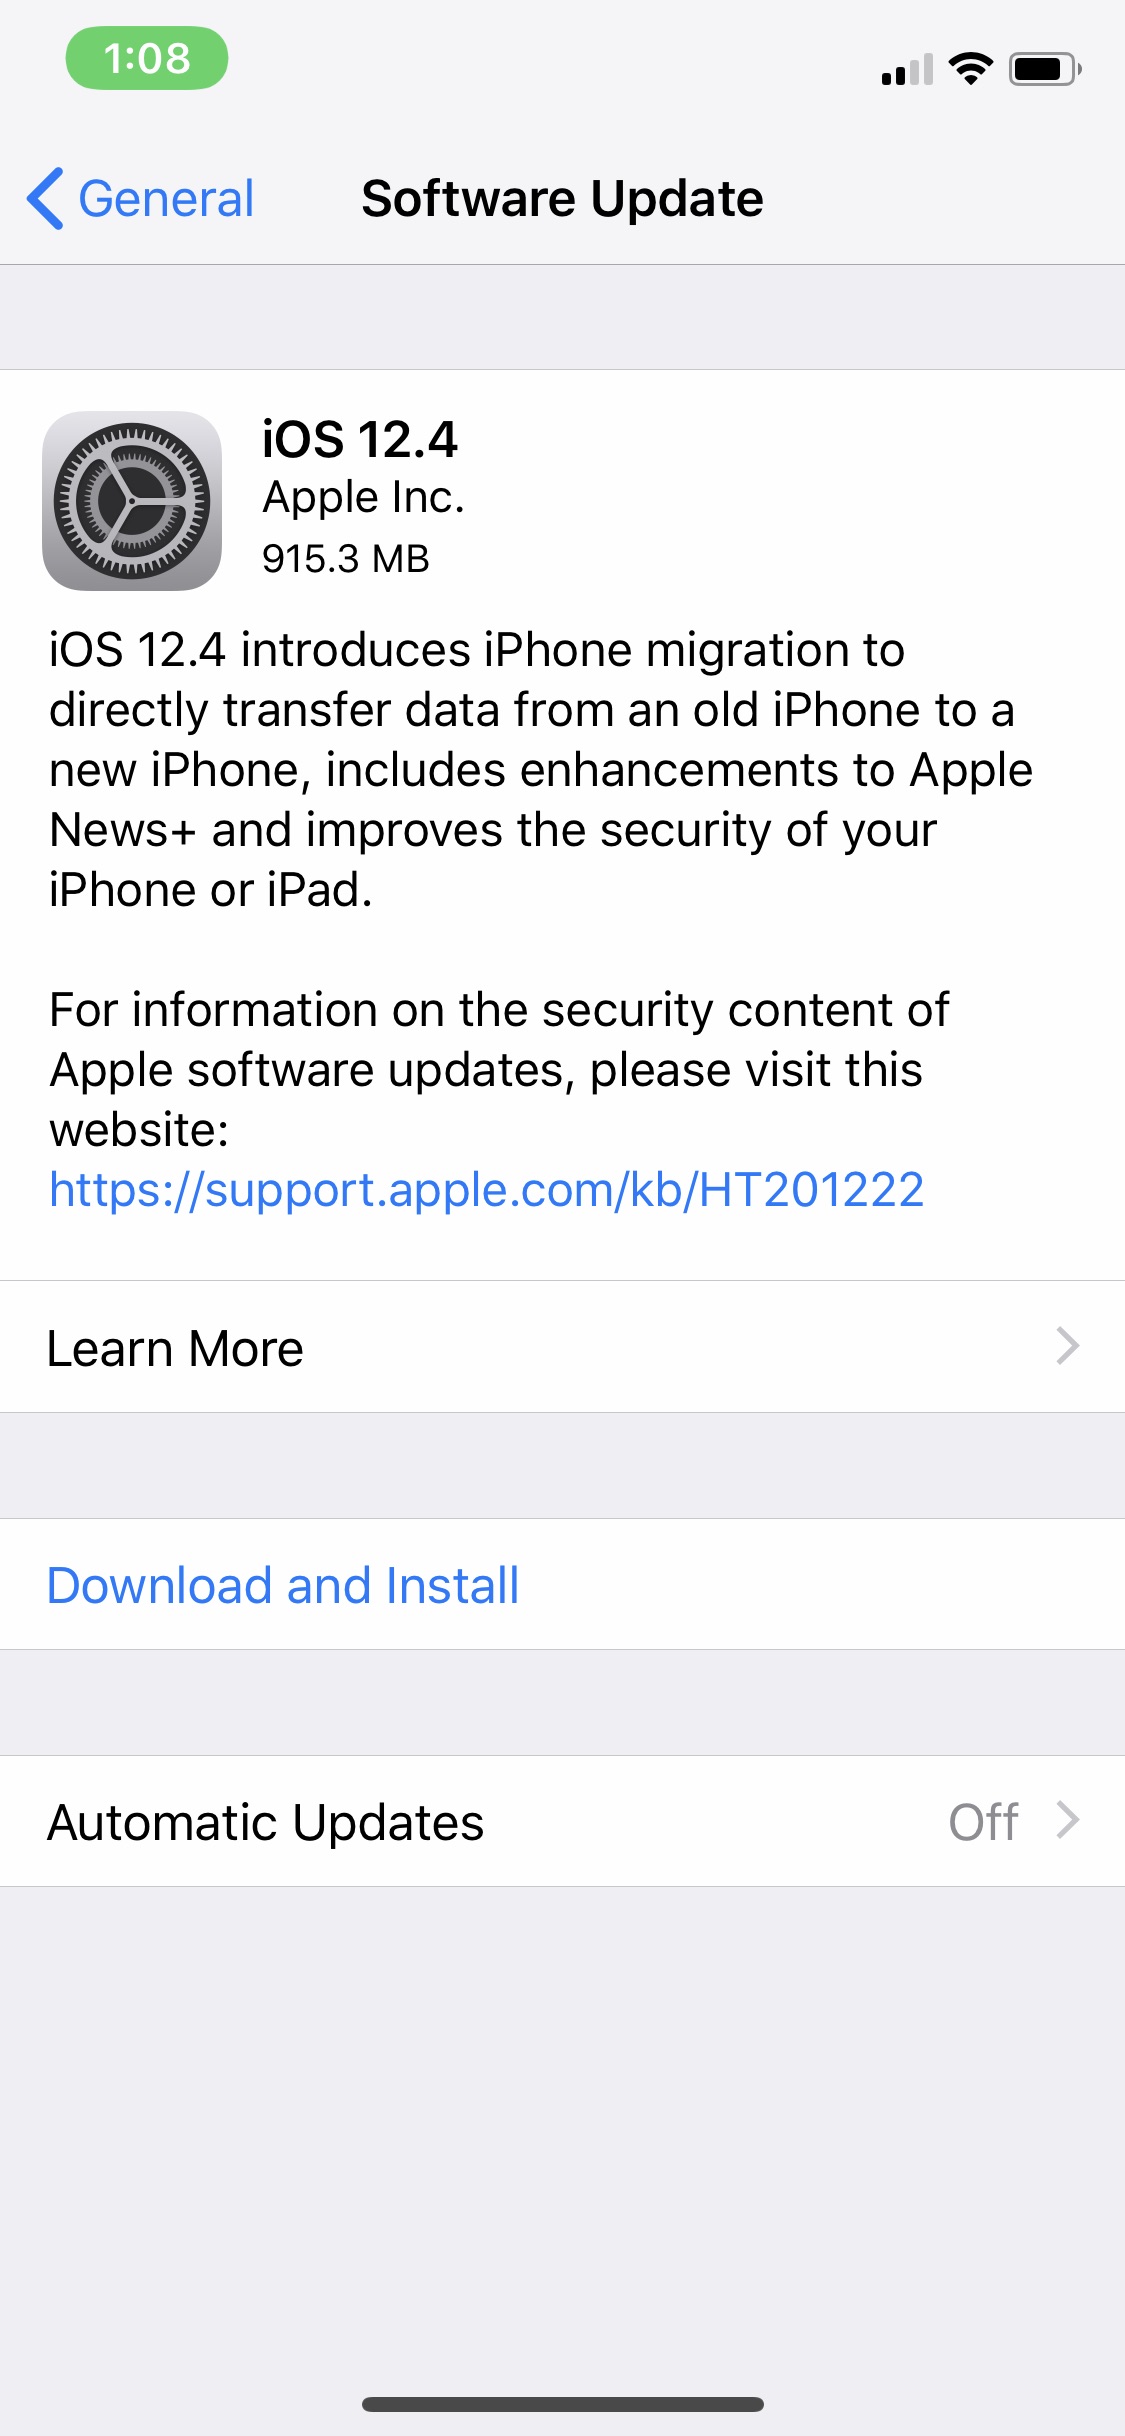 Apple Releases iOS 12.4 With Ability to Migrate Directly From Old to New iPhone [Download]